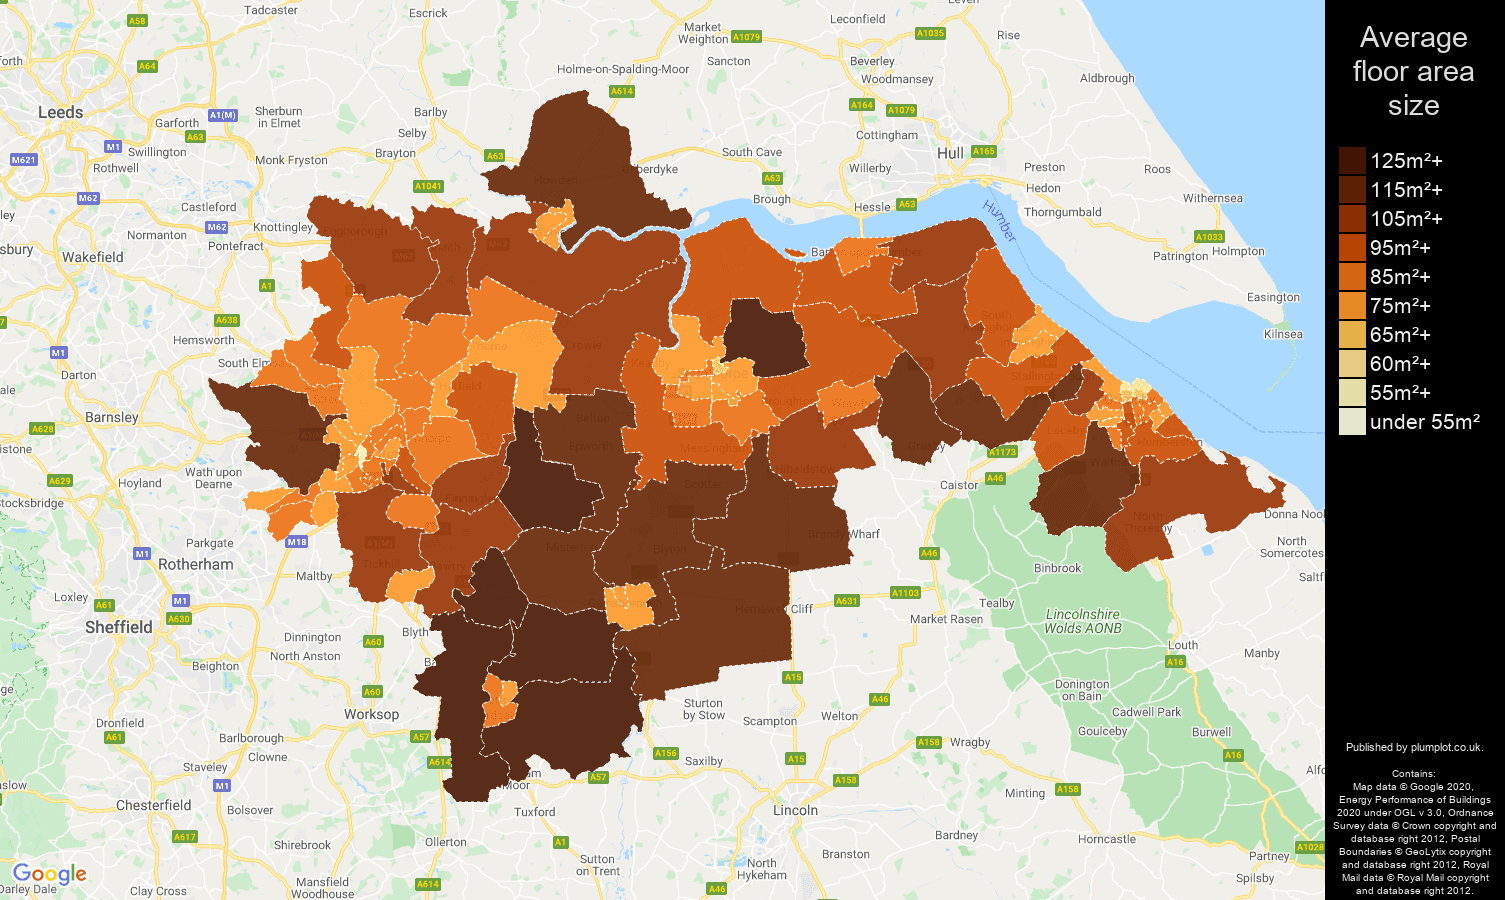 Doncaster map of average floor area size of properties